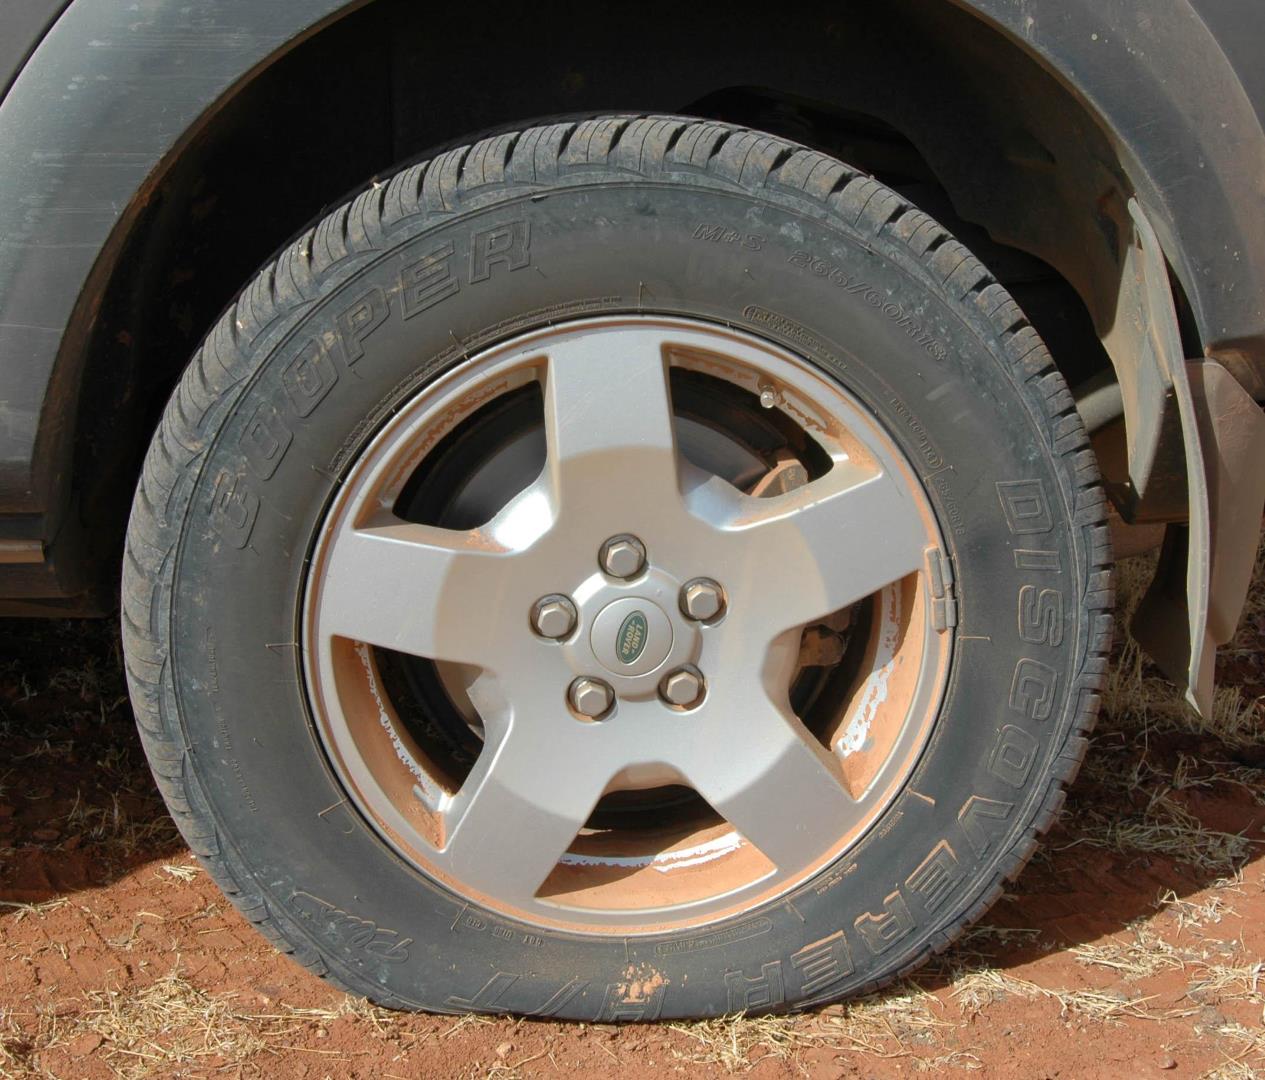 Reasons why a car tyre won't inflate - Car Ownership - AutoTrader